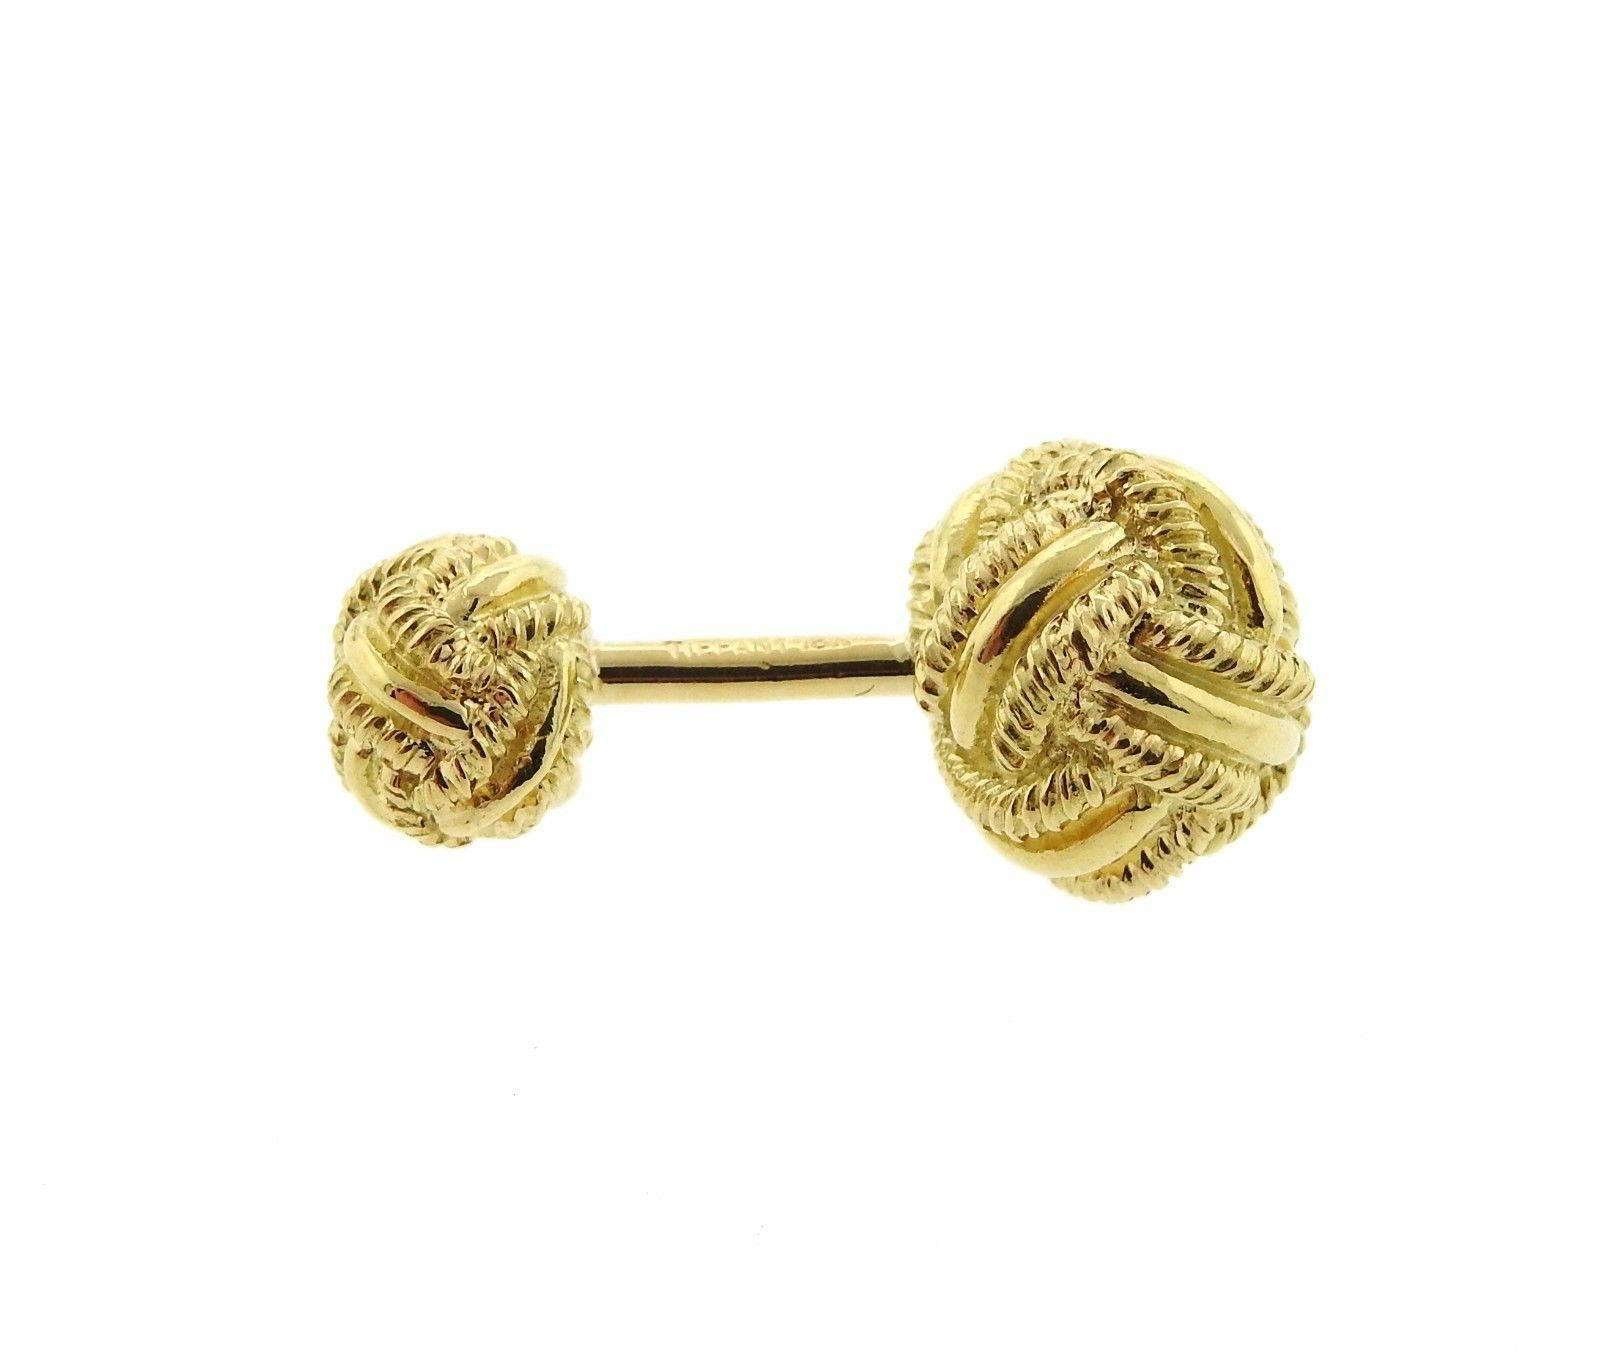 A pair of 18k yellow gold cufflinks by Tiffany & Co.  The cufflink tops measure 13.2mm in diameter.  The weight of the pair is 18.3 grams.  